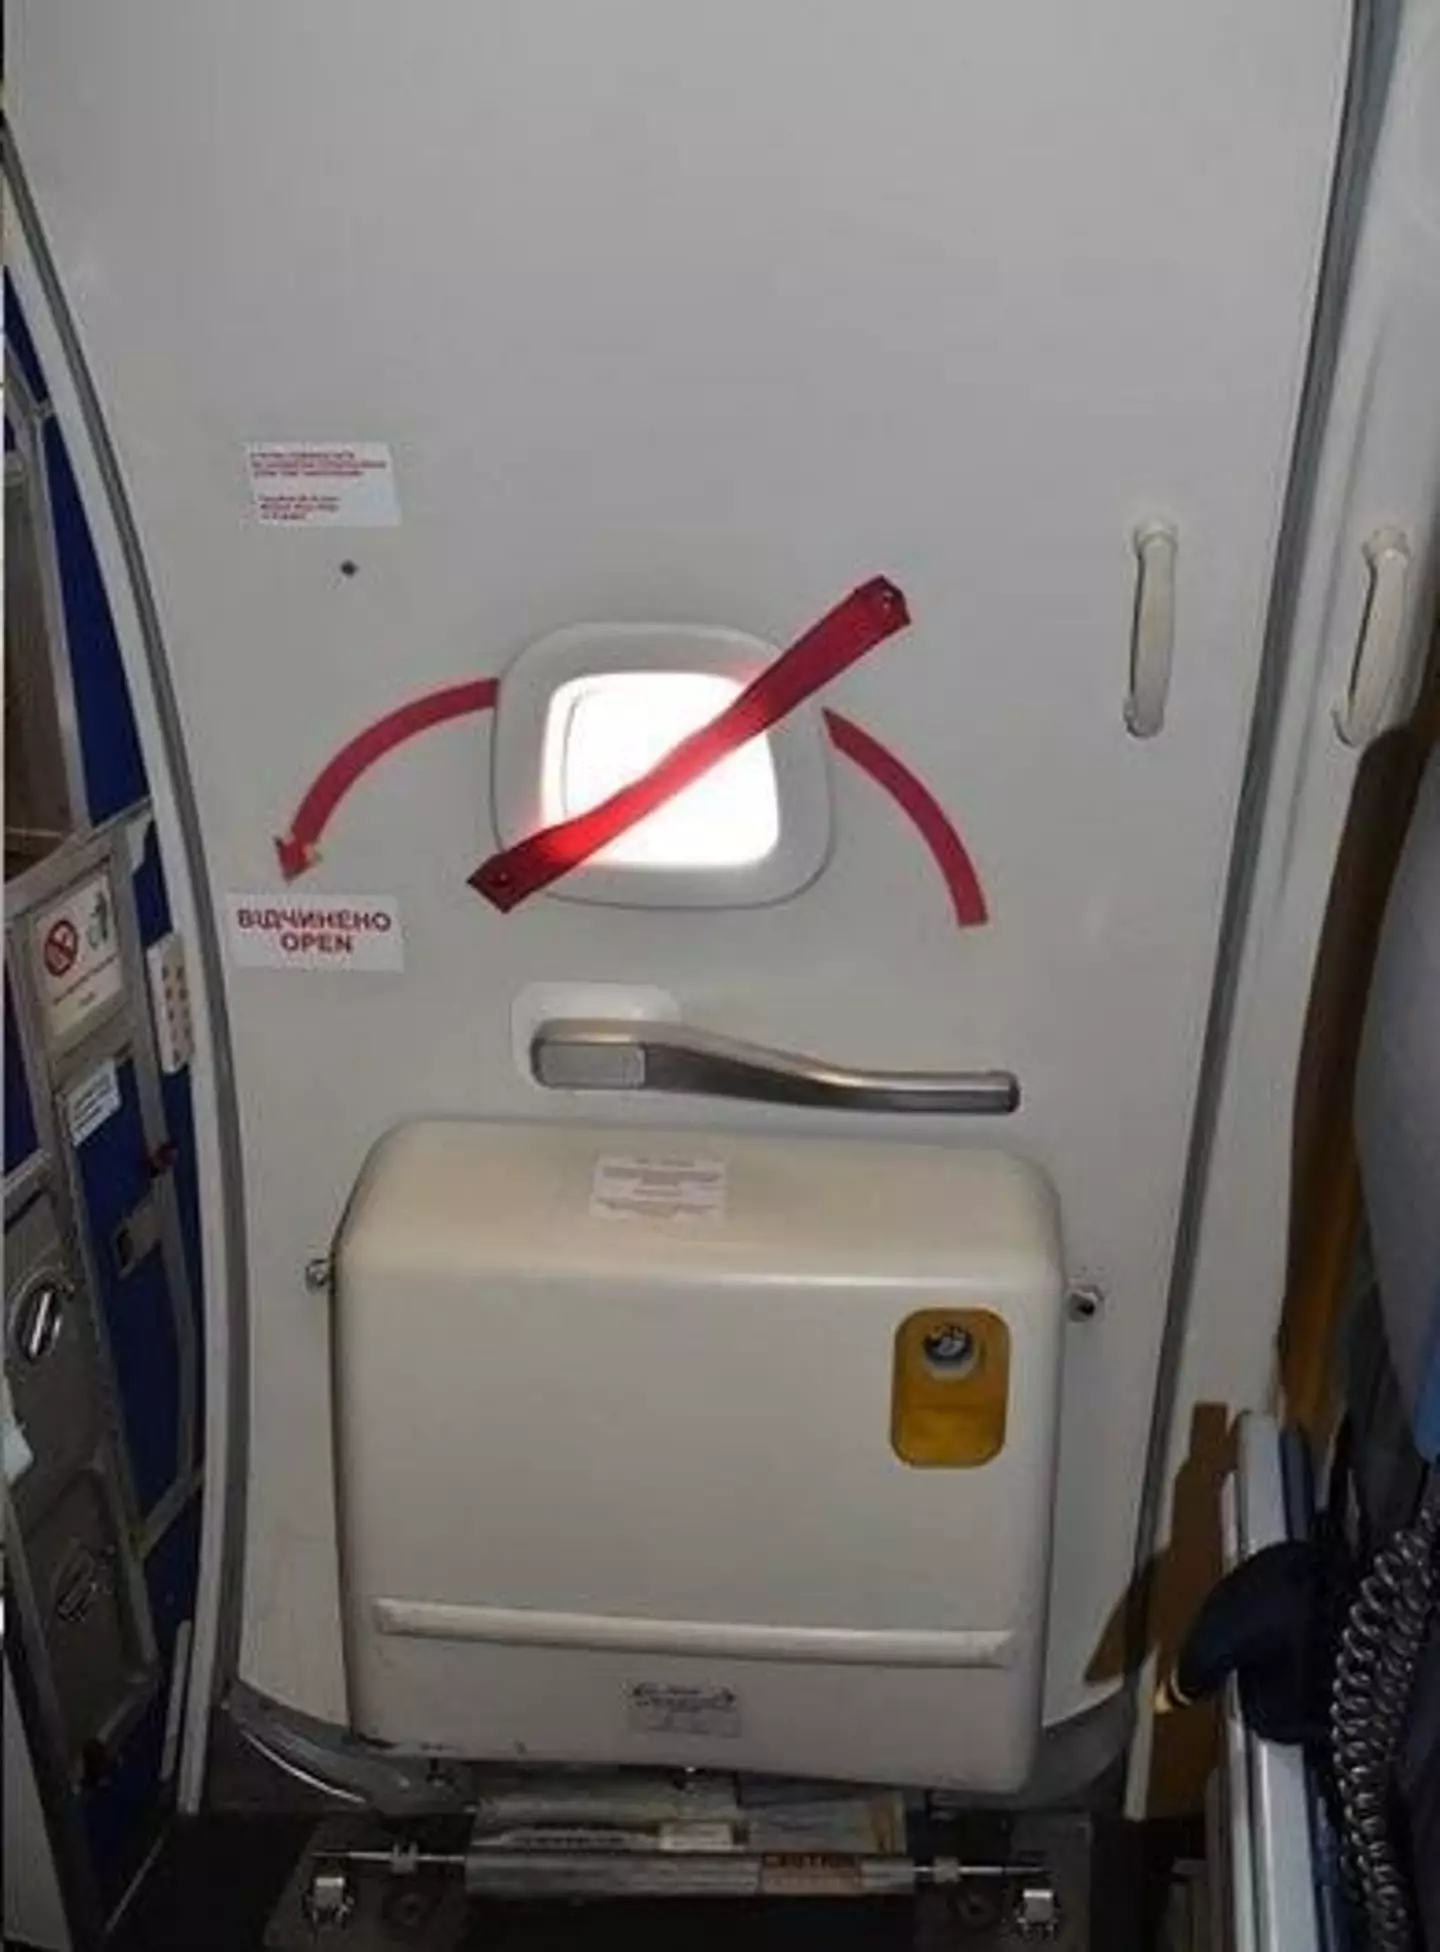 Eagle-eyed passengers may have noticed a bizarre bright red strap which goes across the small window in the plane door.